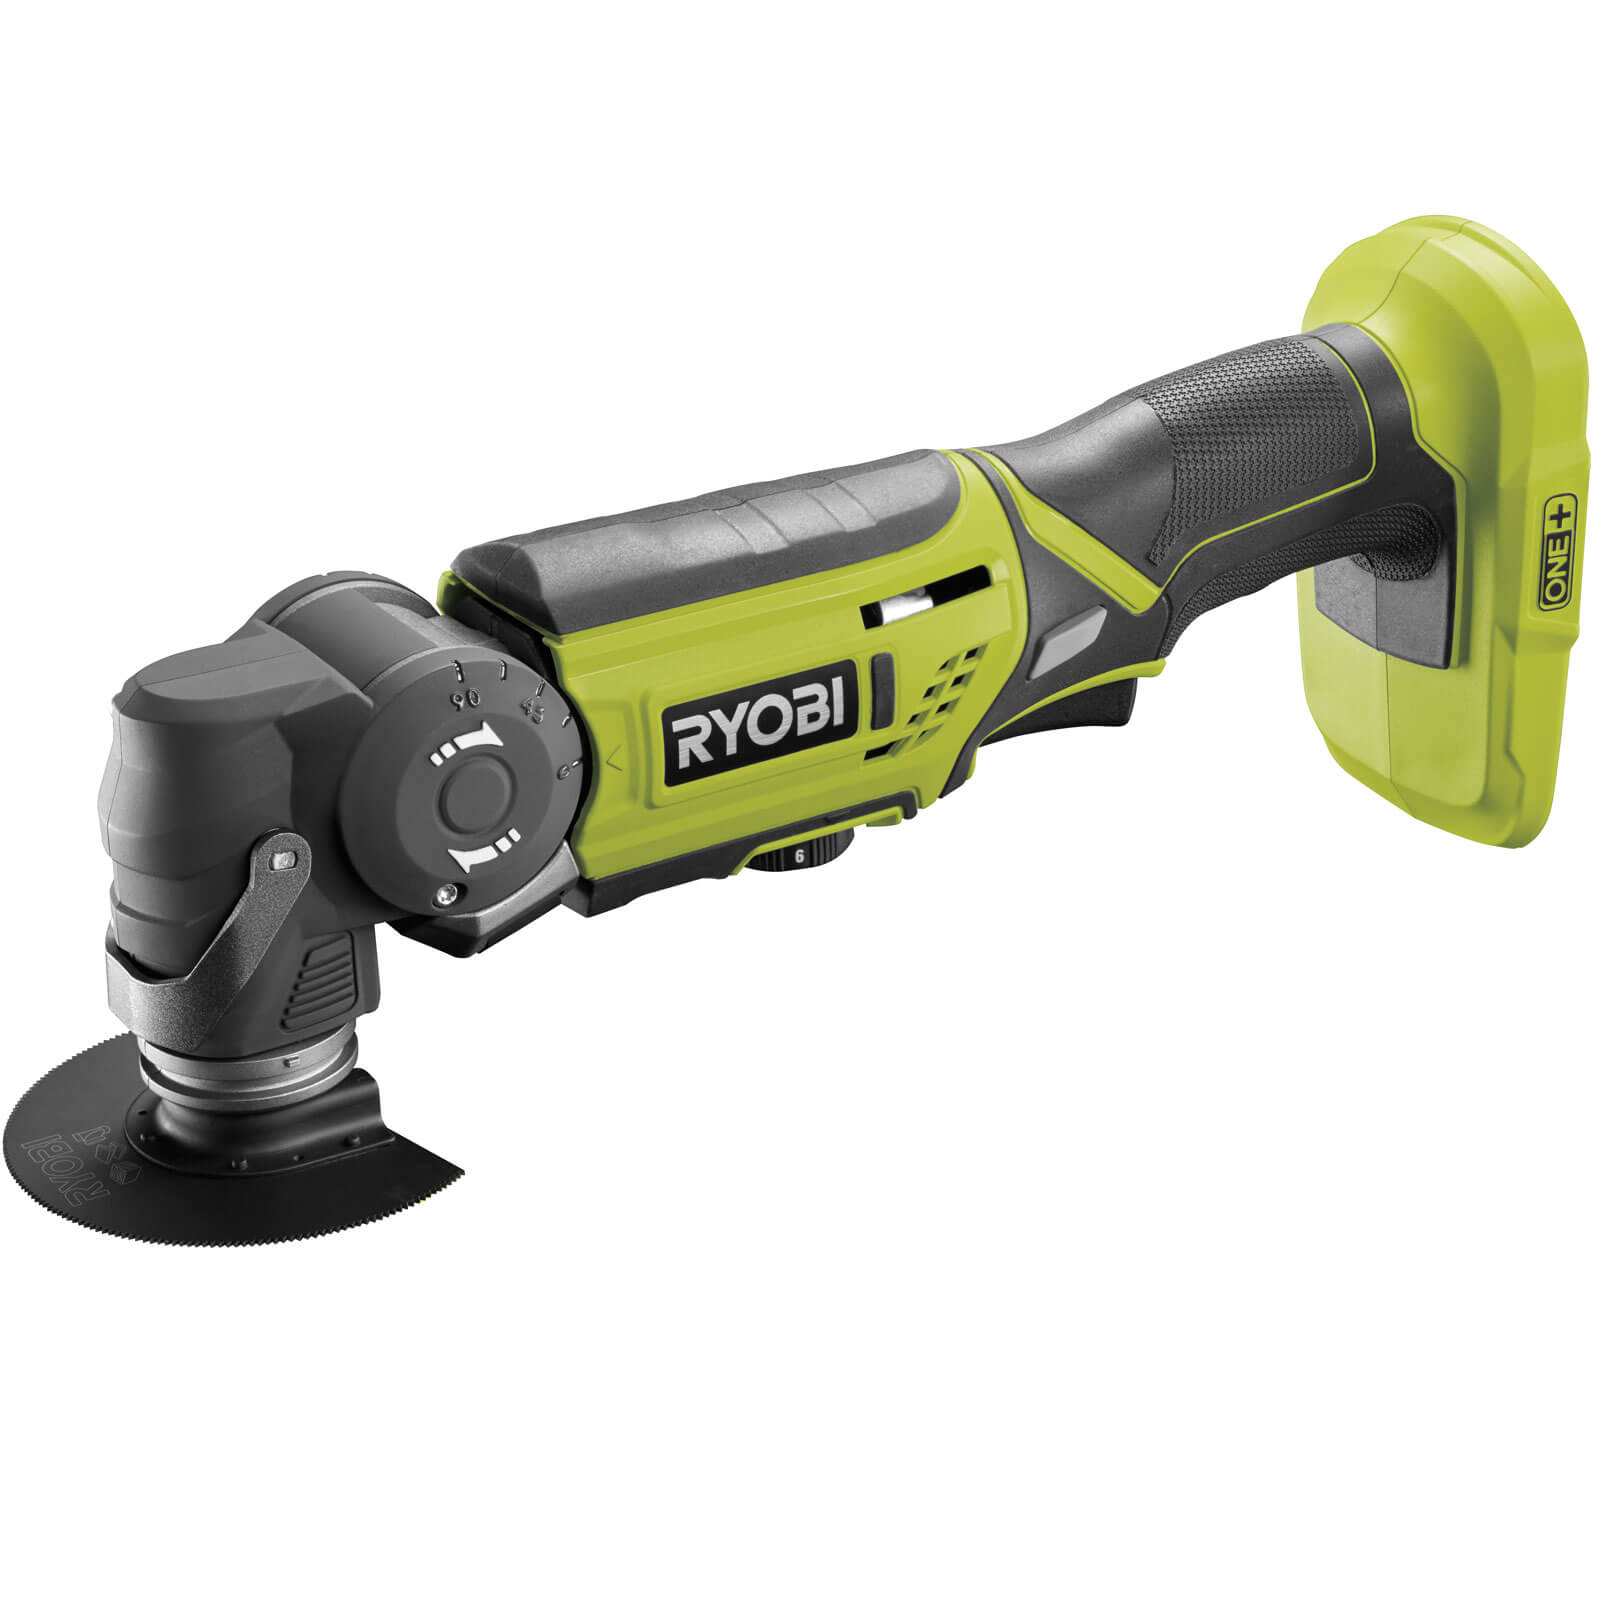 Ryobi Grout Removal Tool - www.inf-inet.com